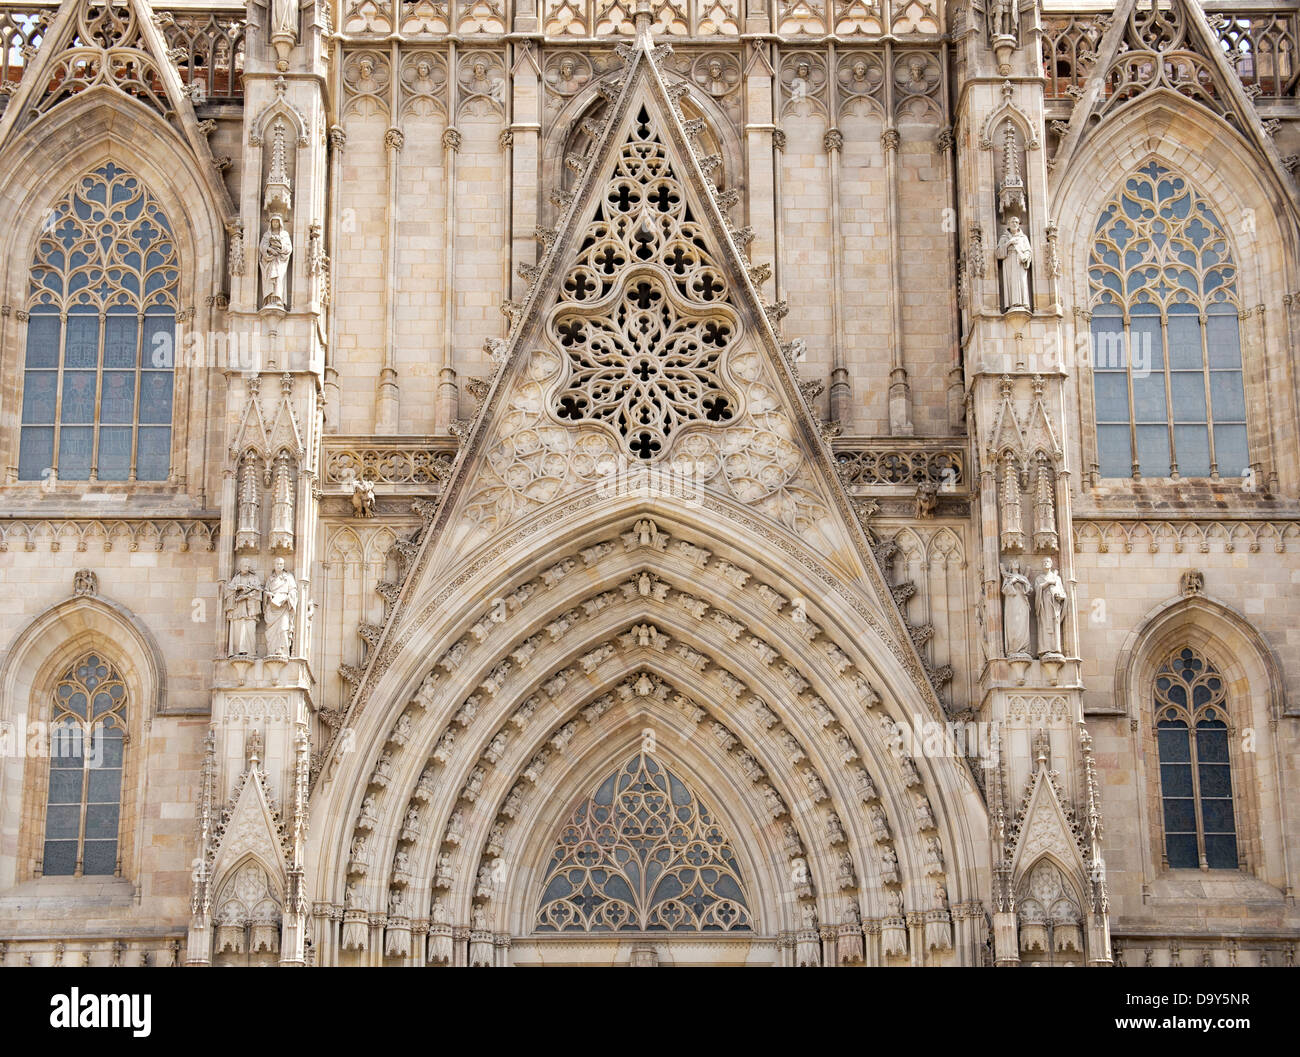 Imposing facade of the Santa Eulalia Cathedral in Barcelona's Gothic Quarter, Spain  1 Stock Photo